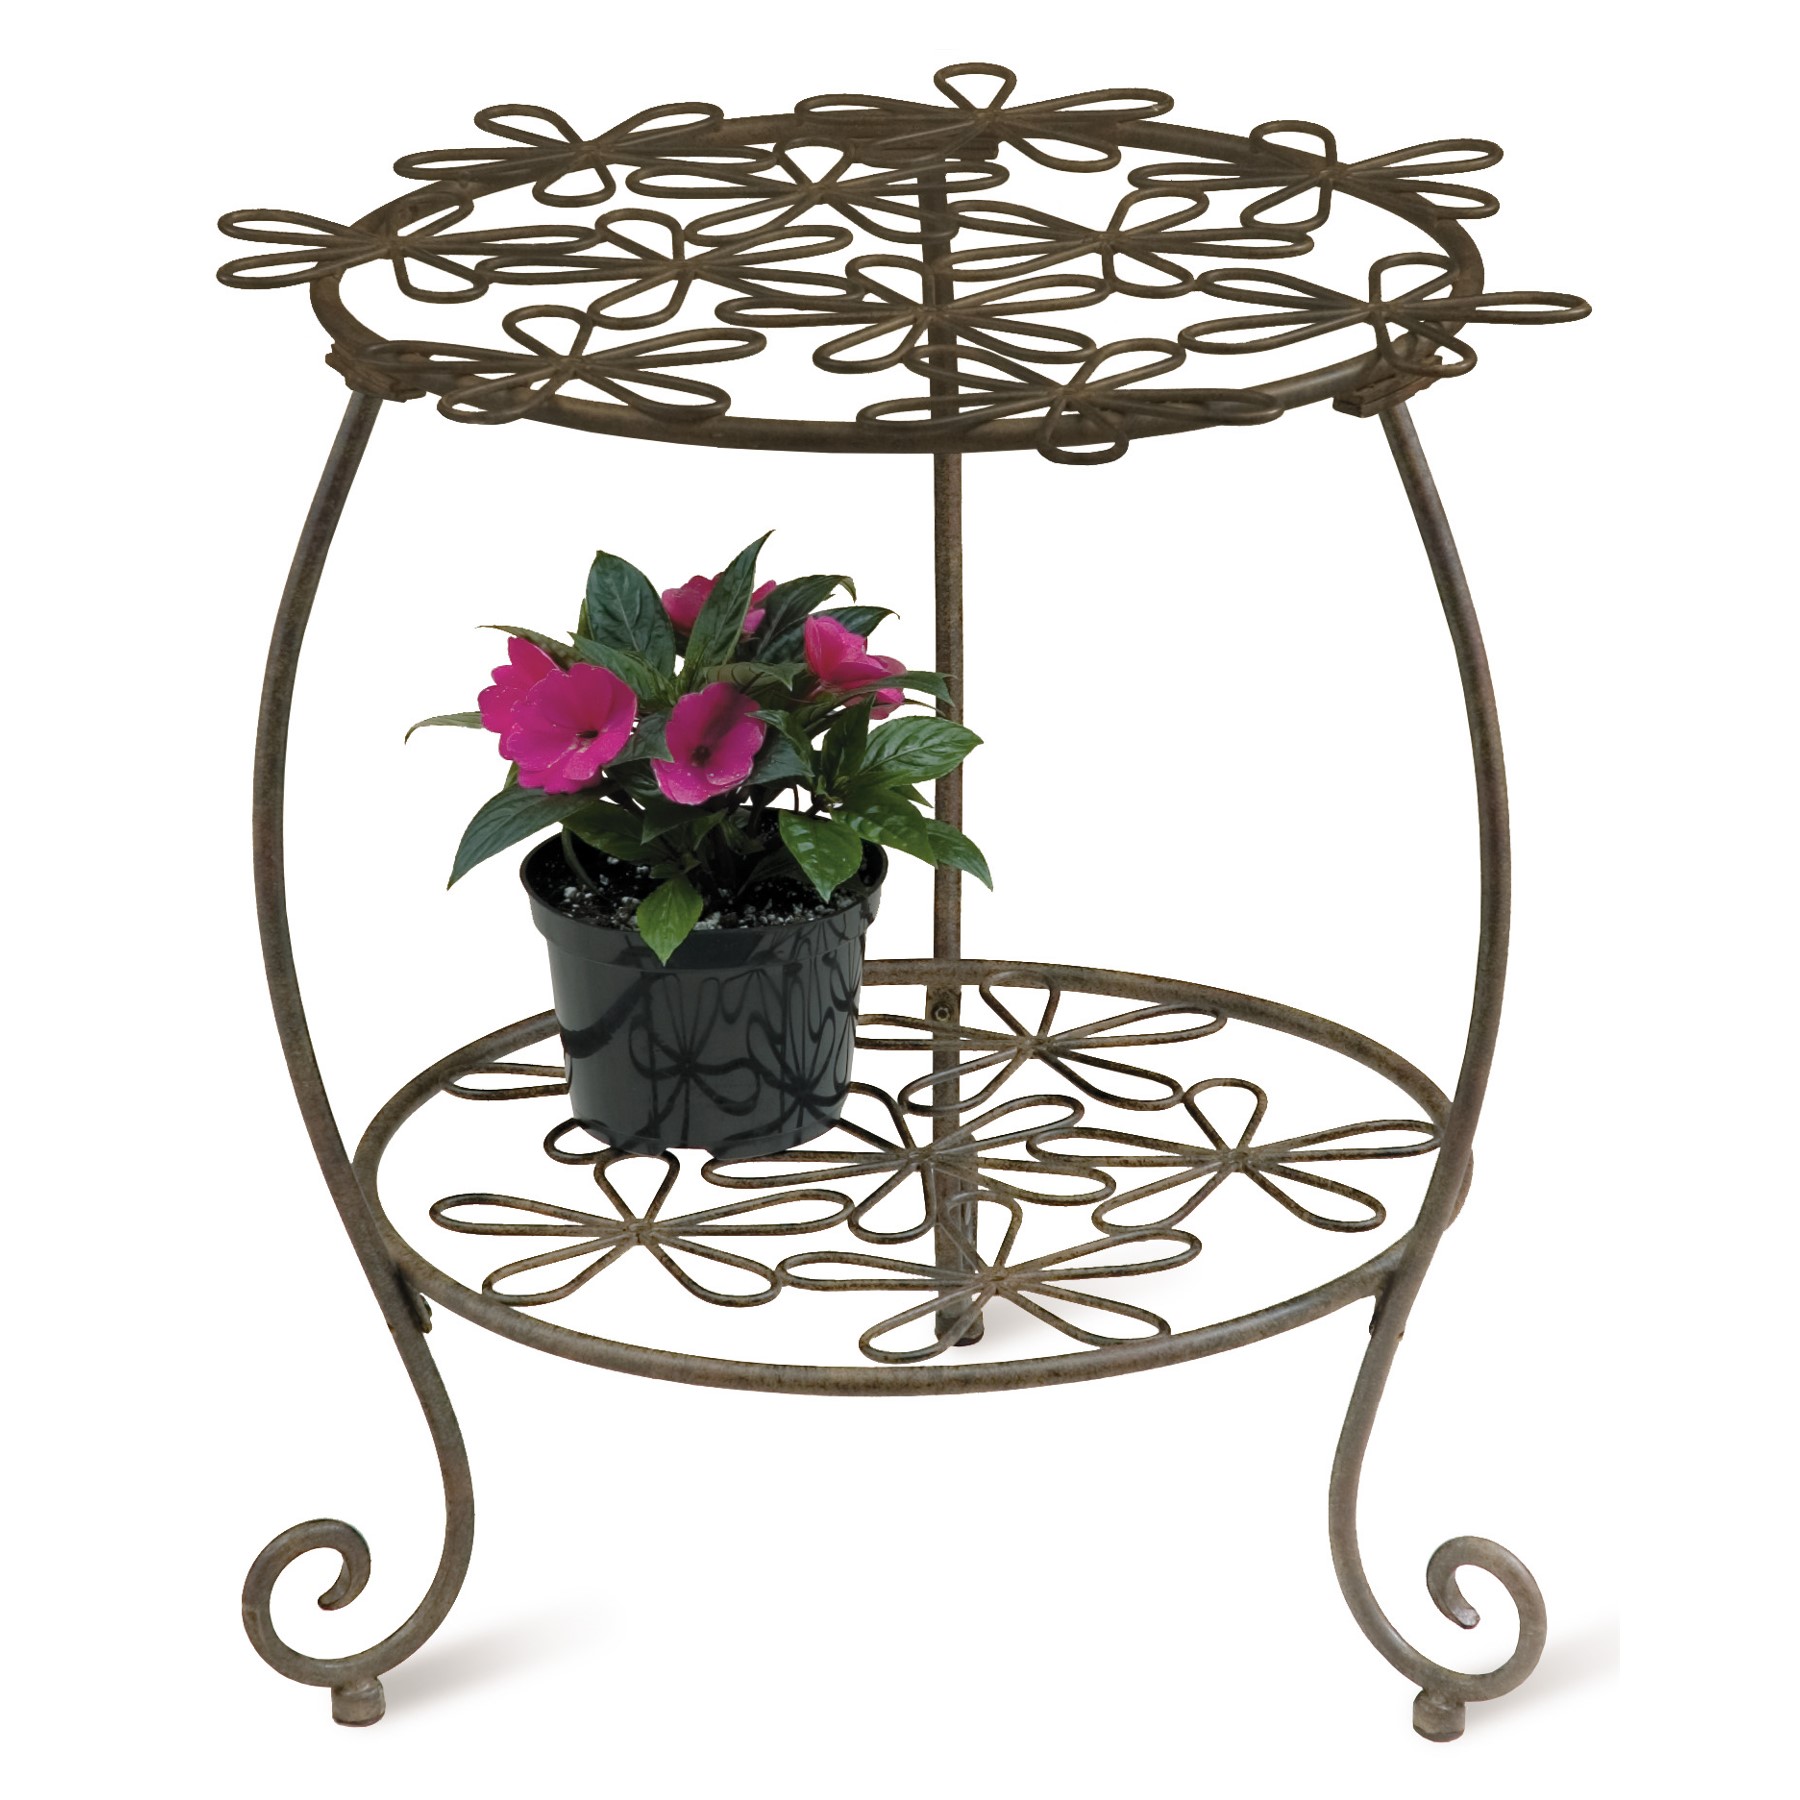 Deer Park Ironworks Daisy Plant Stand